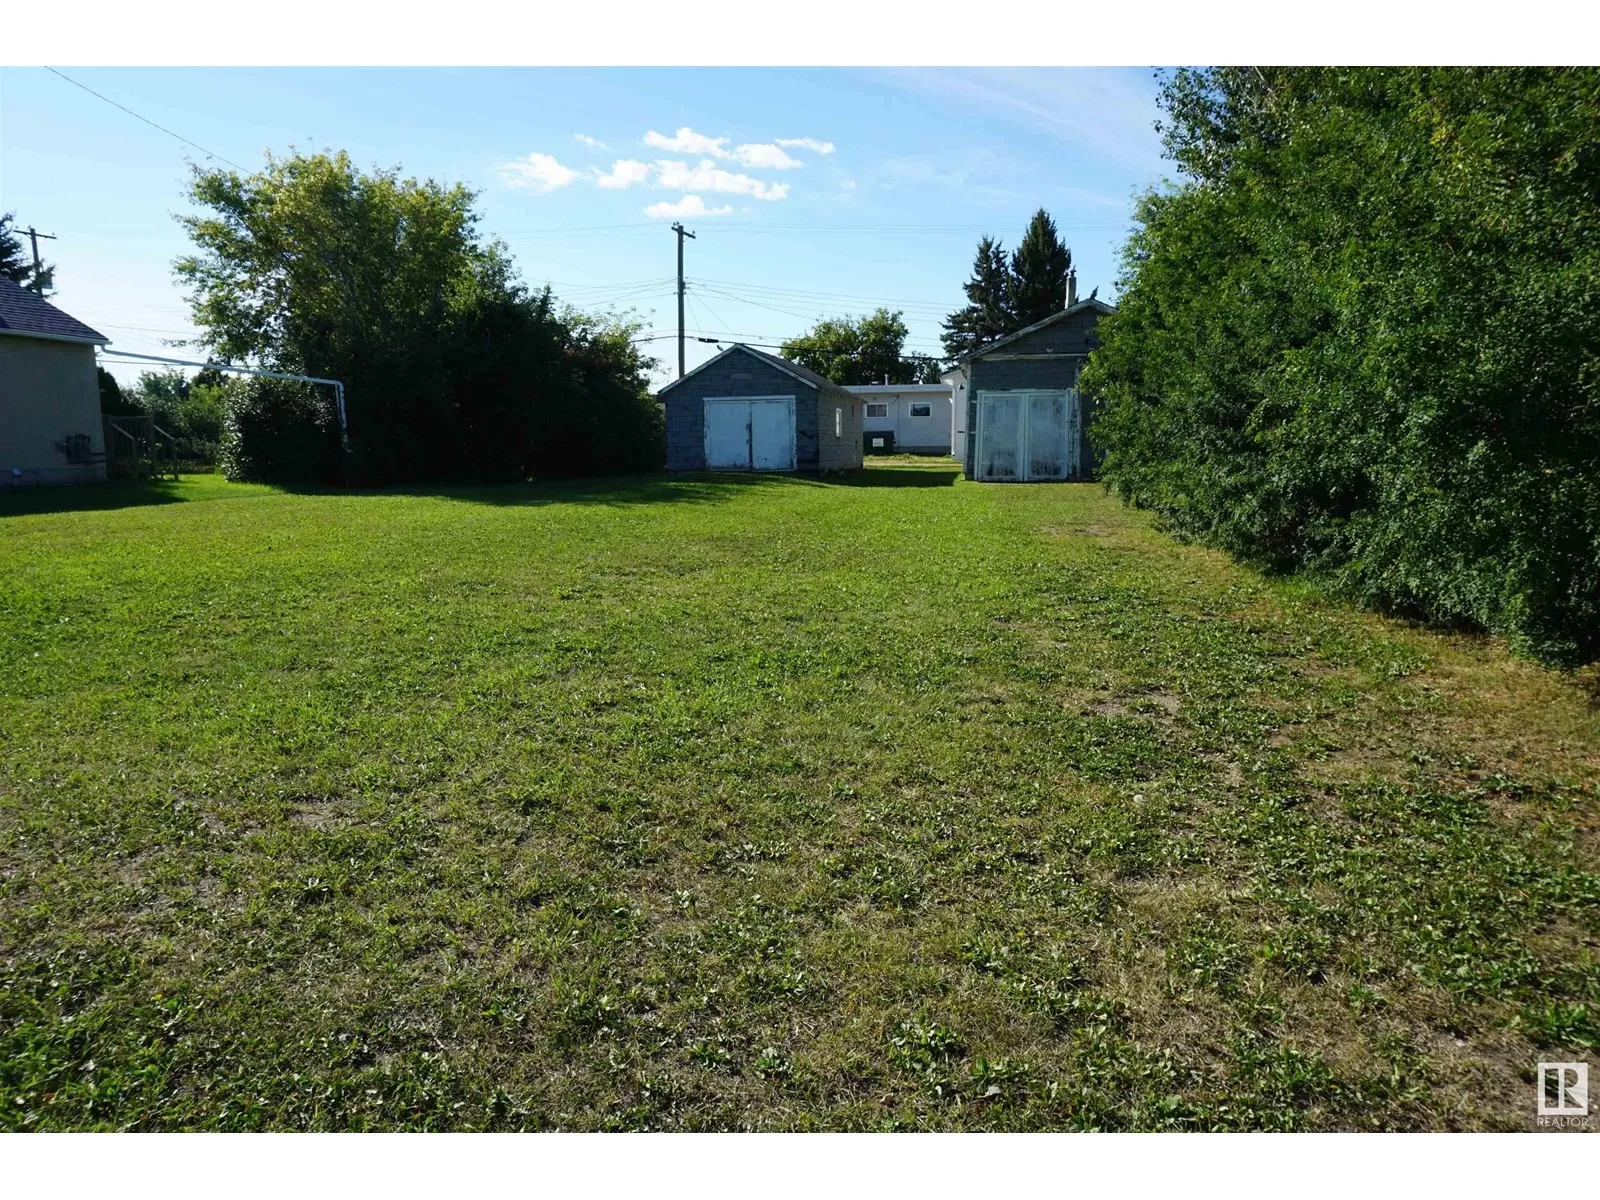 No Building for rent: 388 West Railway Dr, Smoky Lake Town, Alberta T0A 3C0